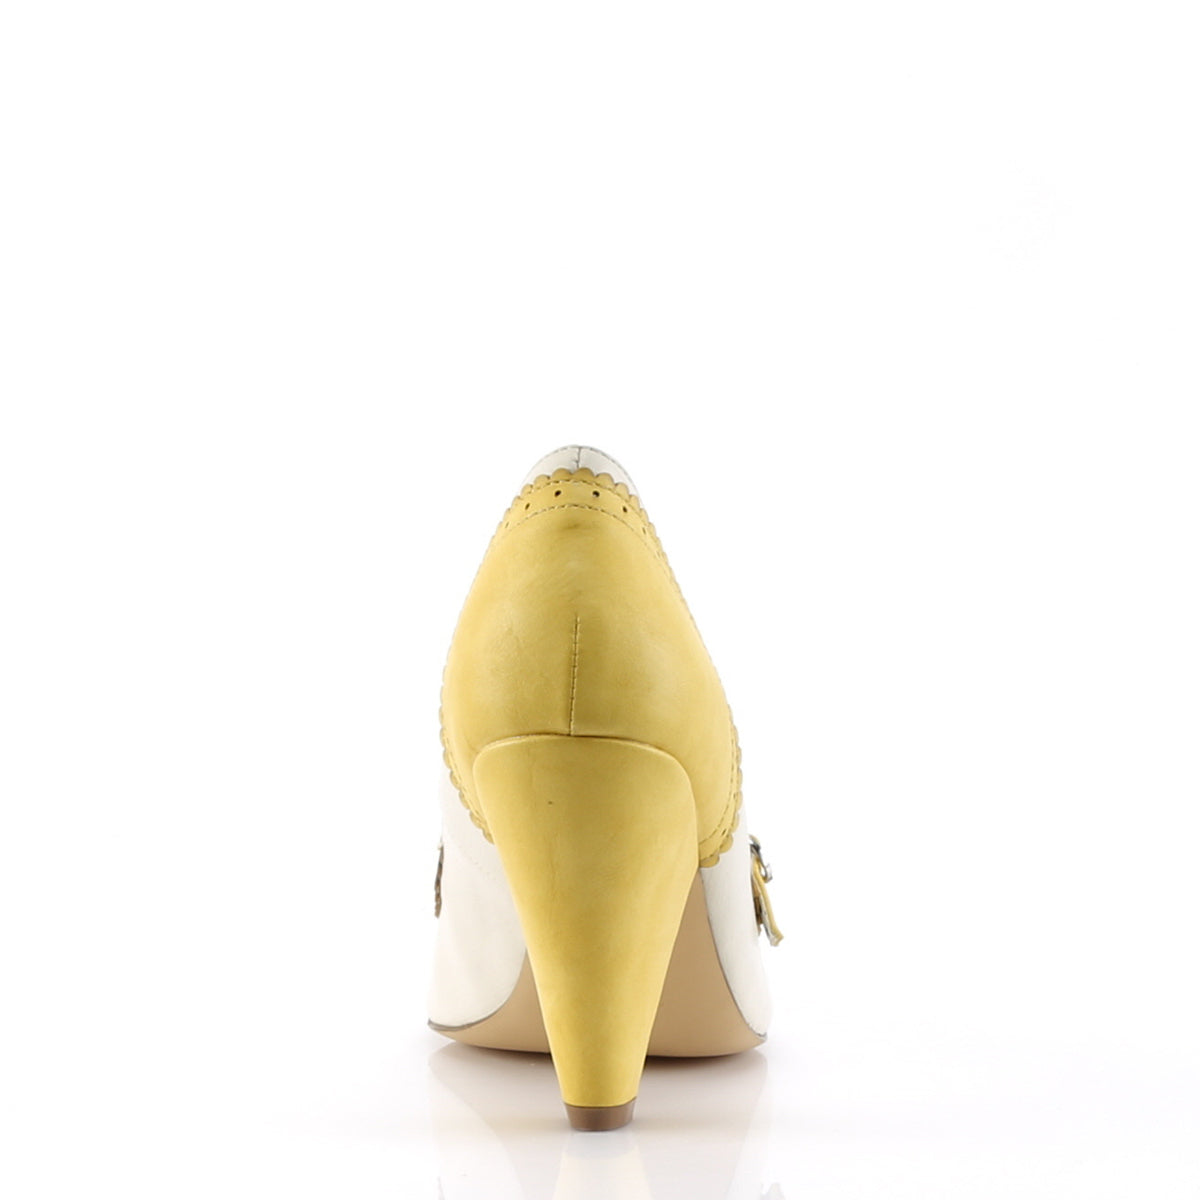 POPPY-18 Pin Up Couture Yellow-Cream Faux Leather Single Soles [Retro Glamour Shoes]